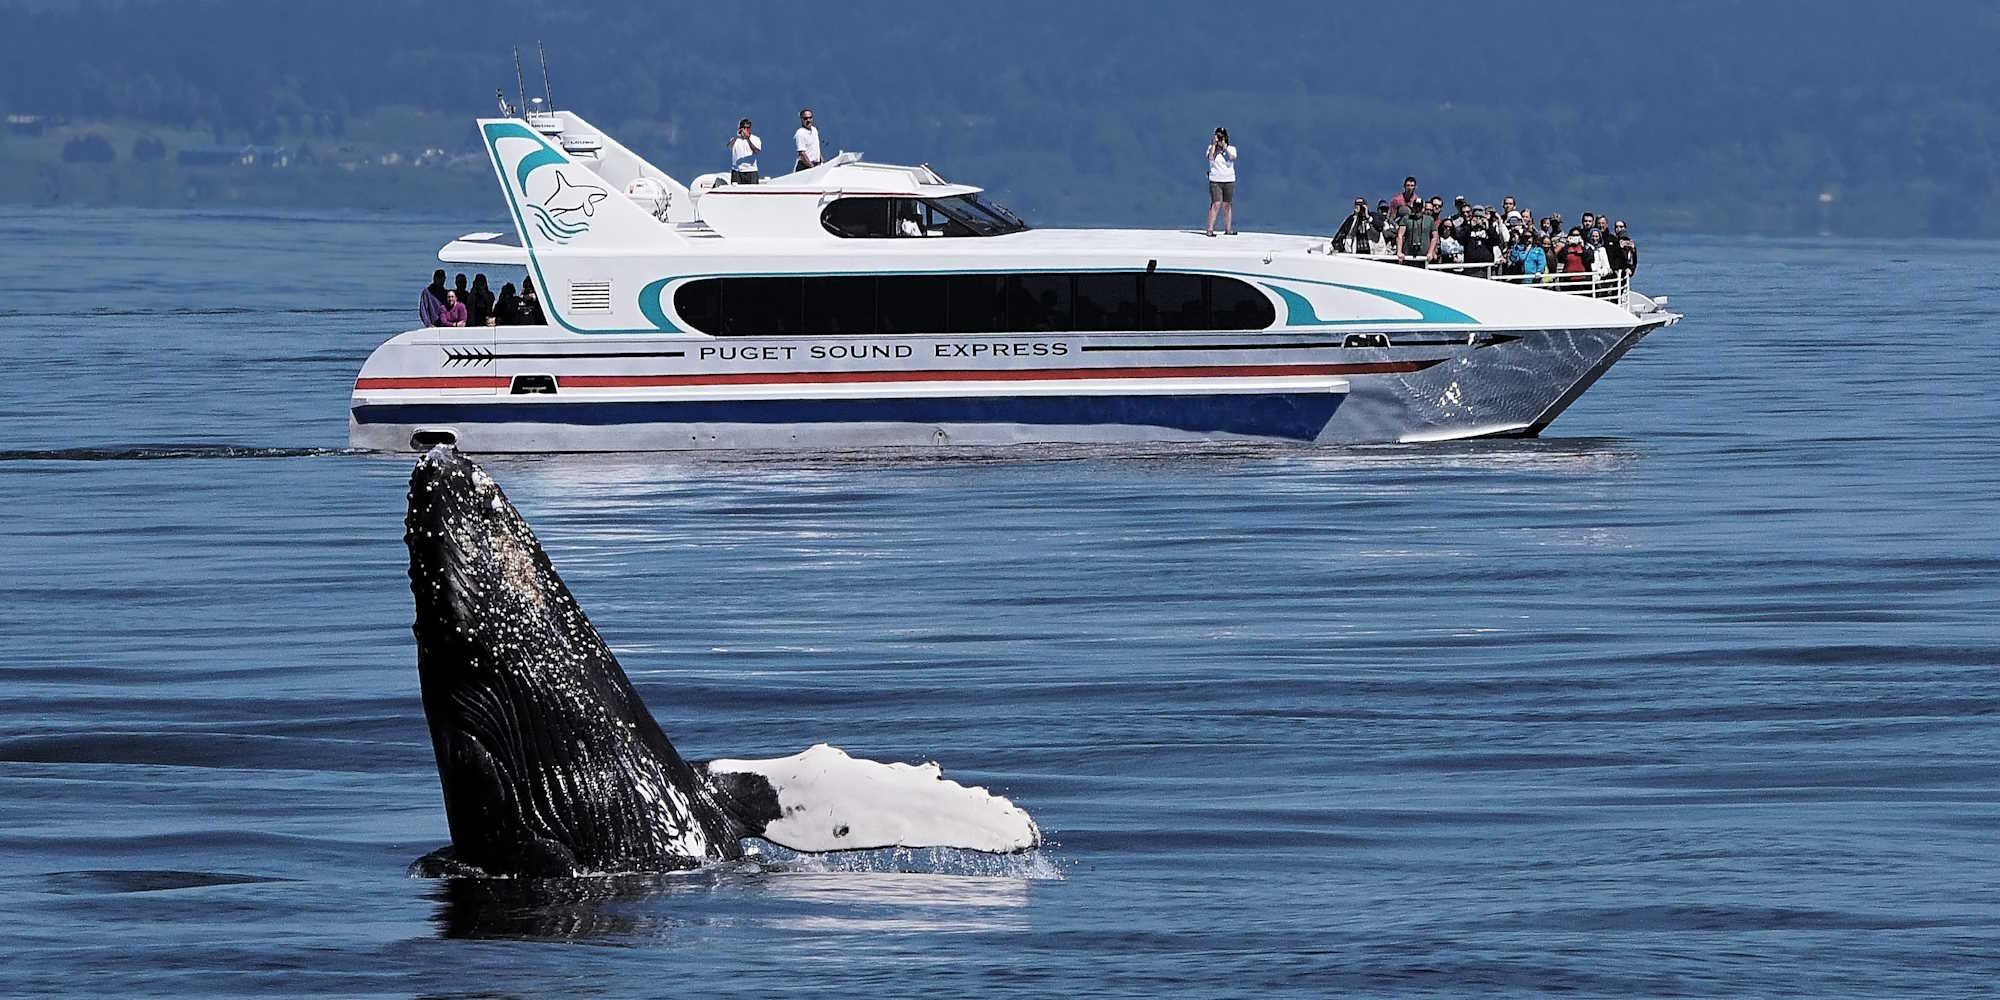 Puget Sound Express Whale Watching